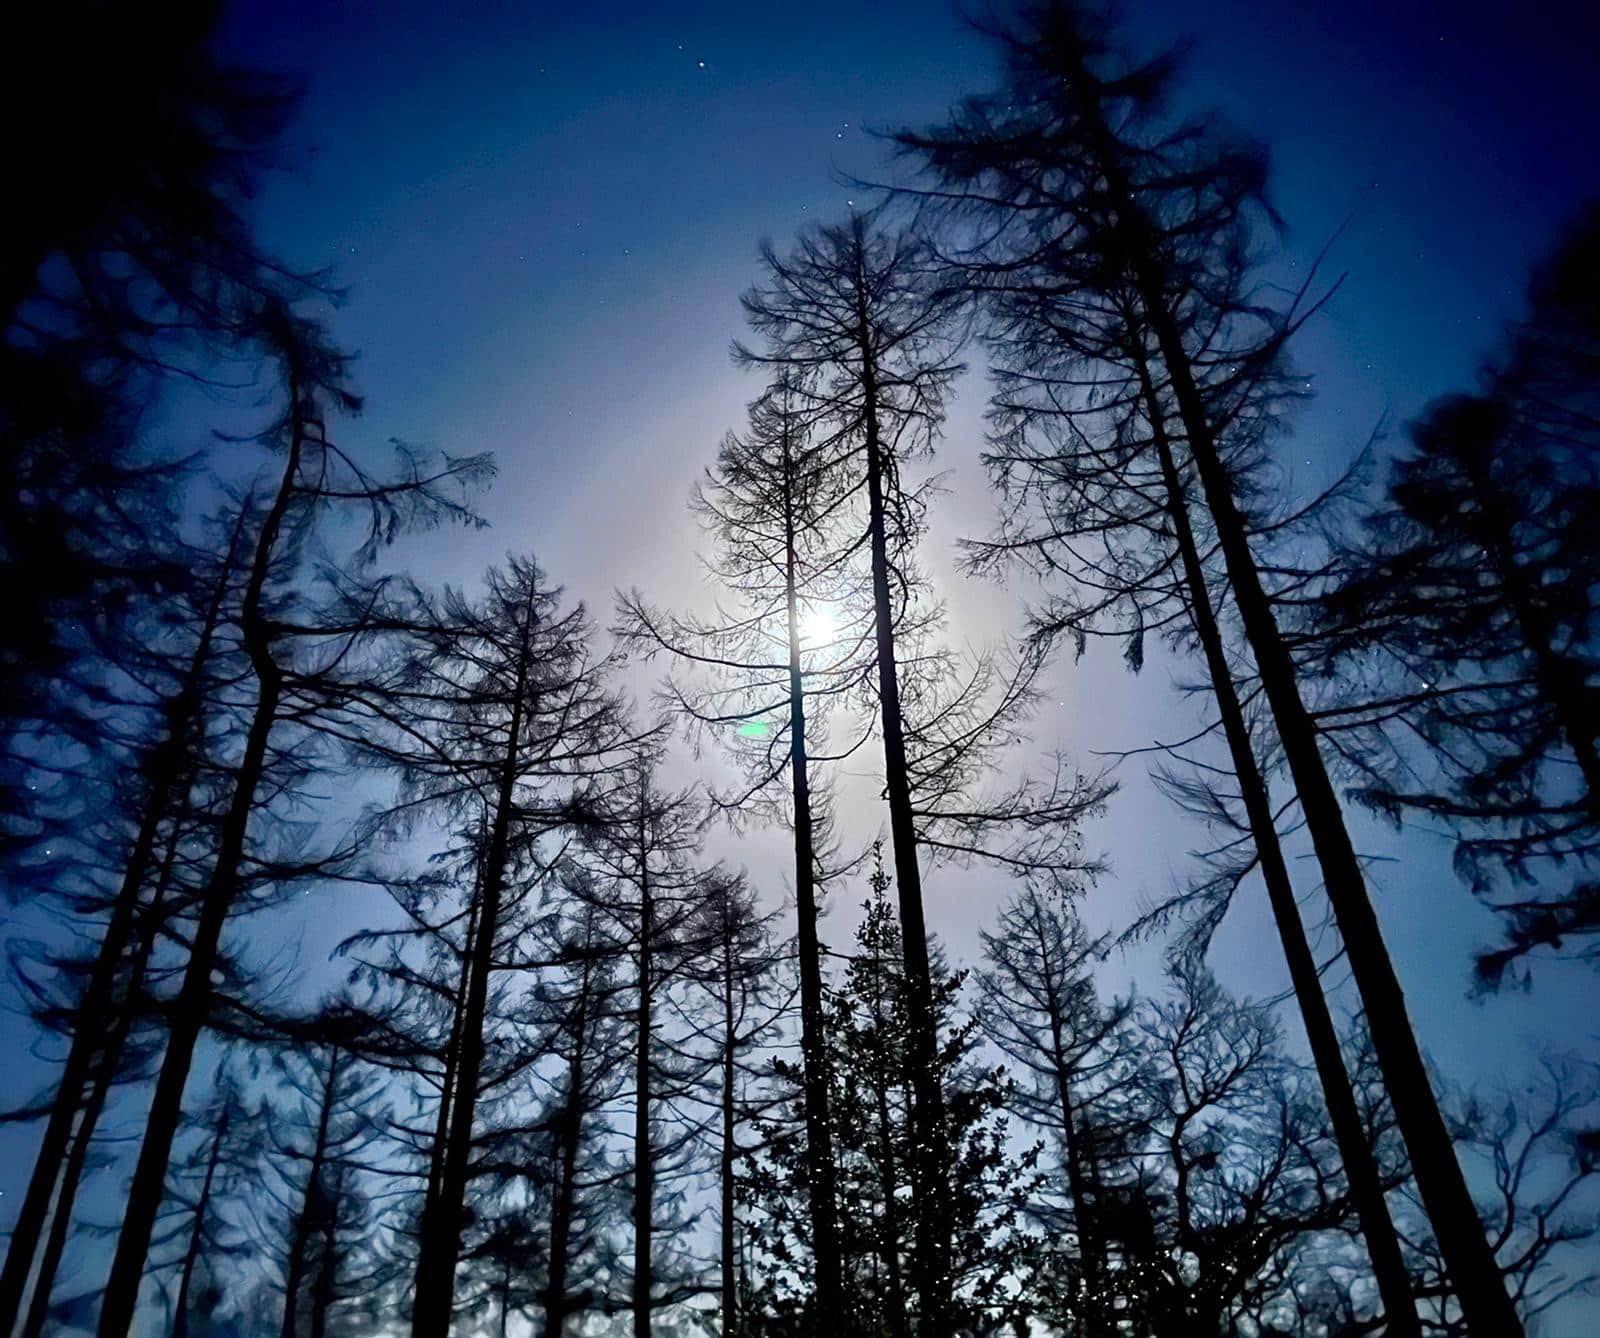 Full moon riding above trees in Whinlatter Forest